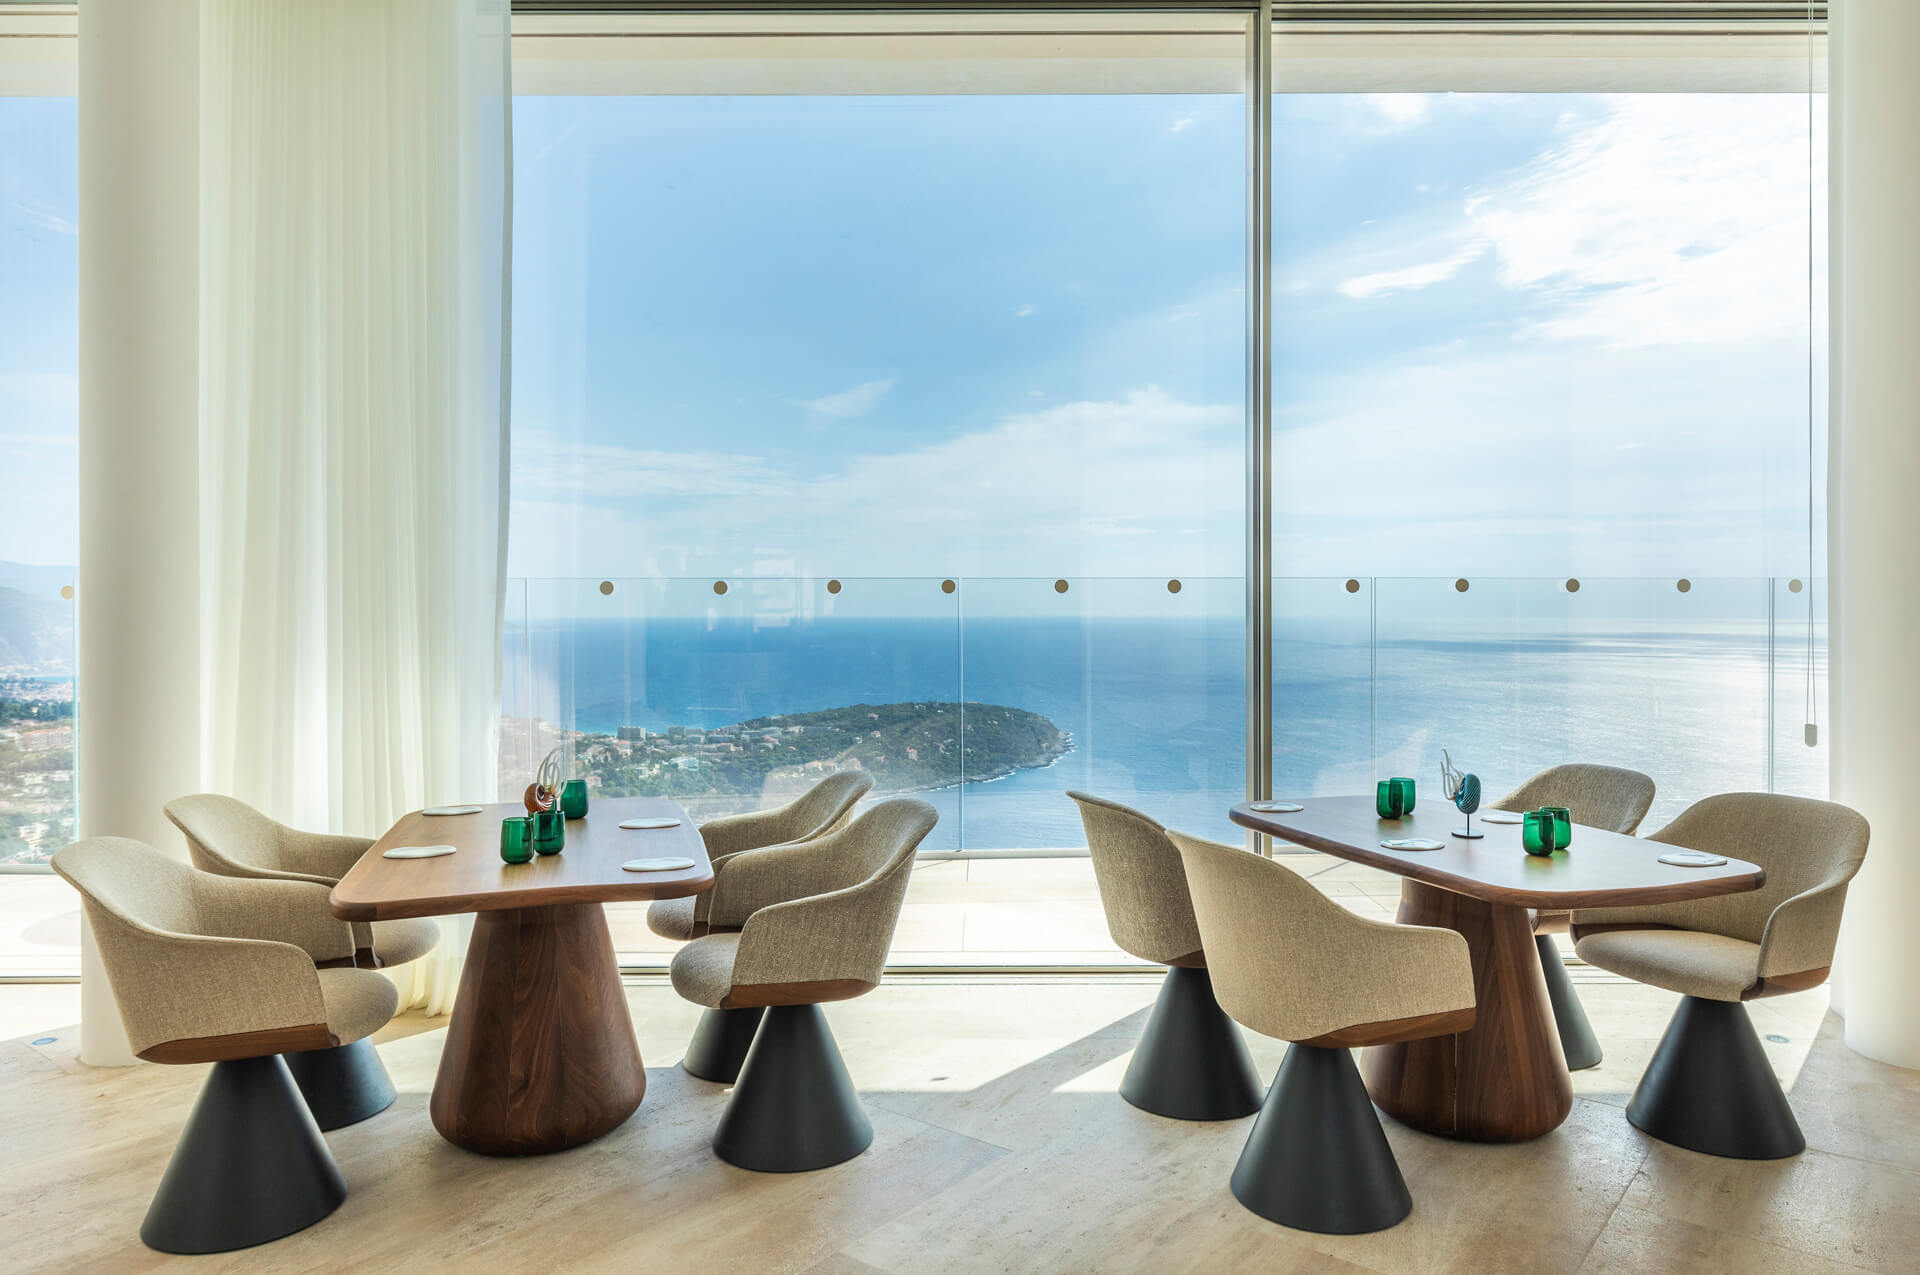 Two wooden tables with modern chairs next to a huge terrace with sea views at Ceto restaurant.